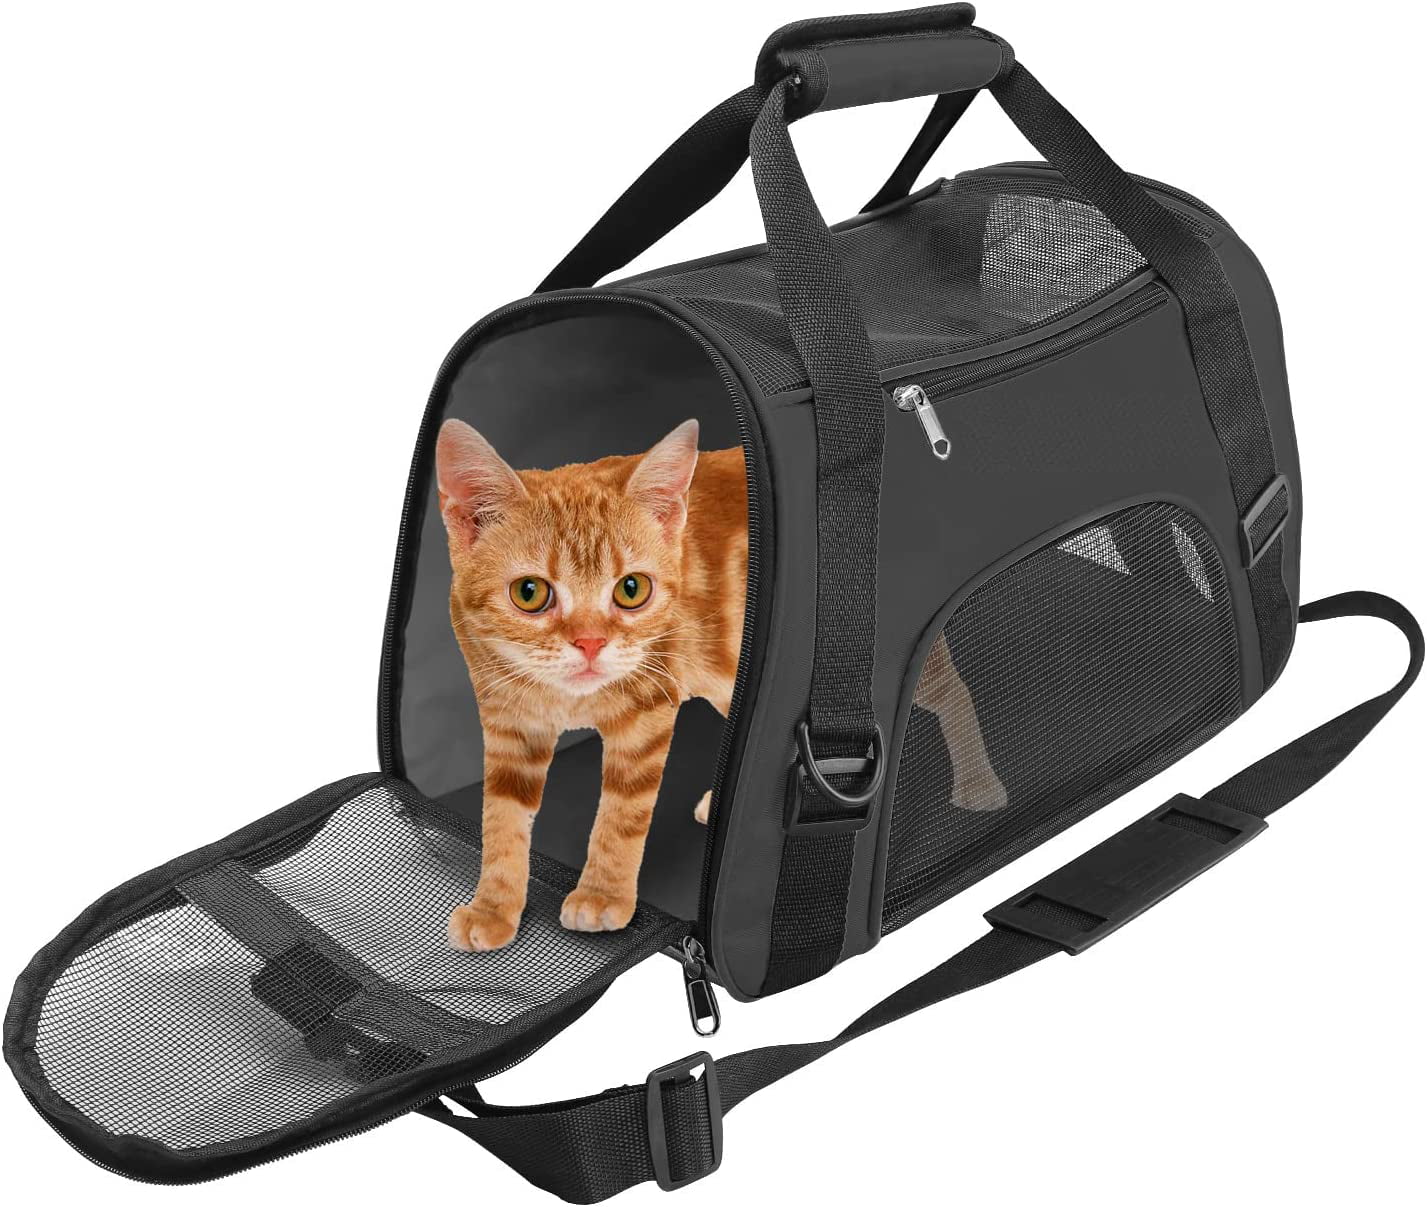 EXPAWLORER Cat Carrier Large, Soft-Sided Pet Carrier for Cat,Top Load Cat  Travel Carriers for Medium Cats Under 25, Airline Approved Pet Bag Carriers